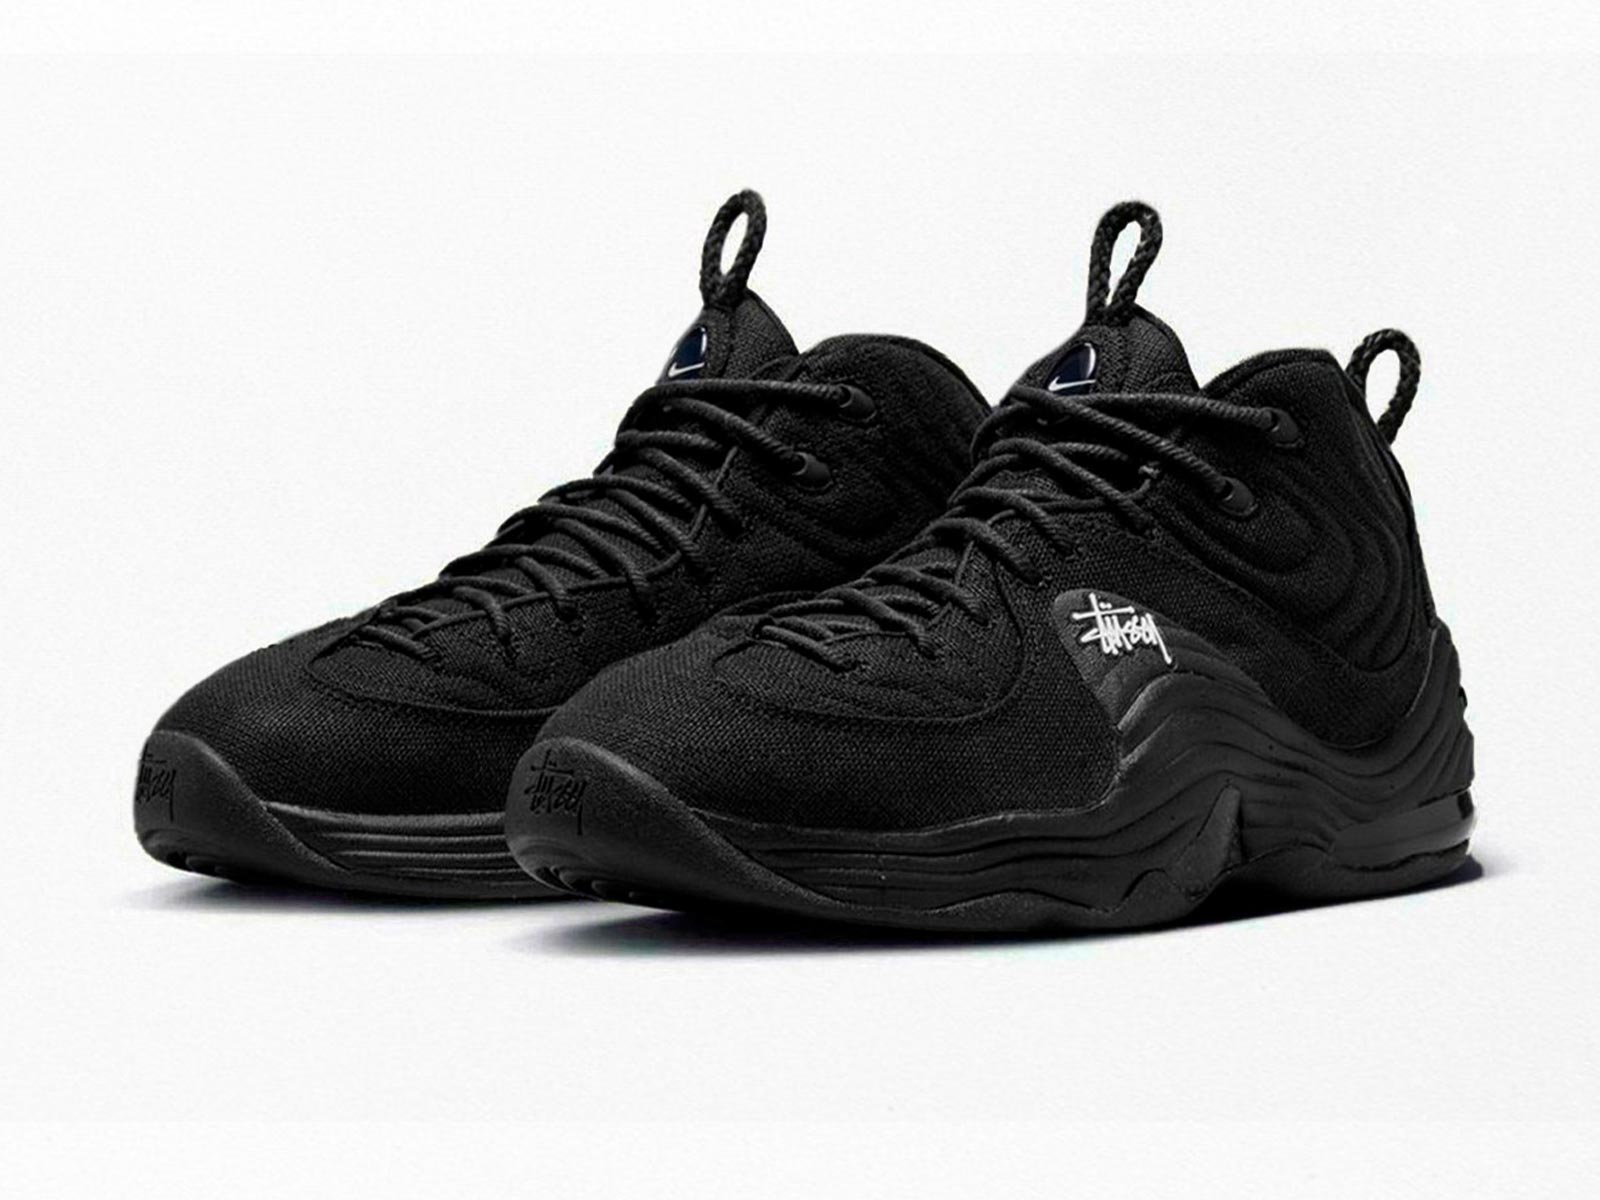 First images of the Stüssy x Nike Air Penny 2